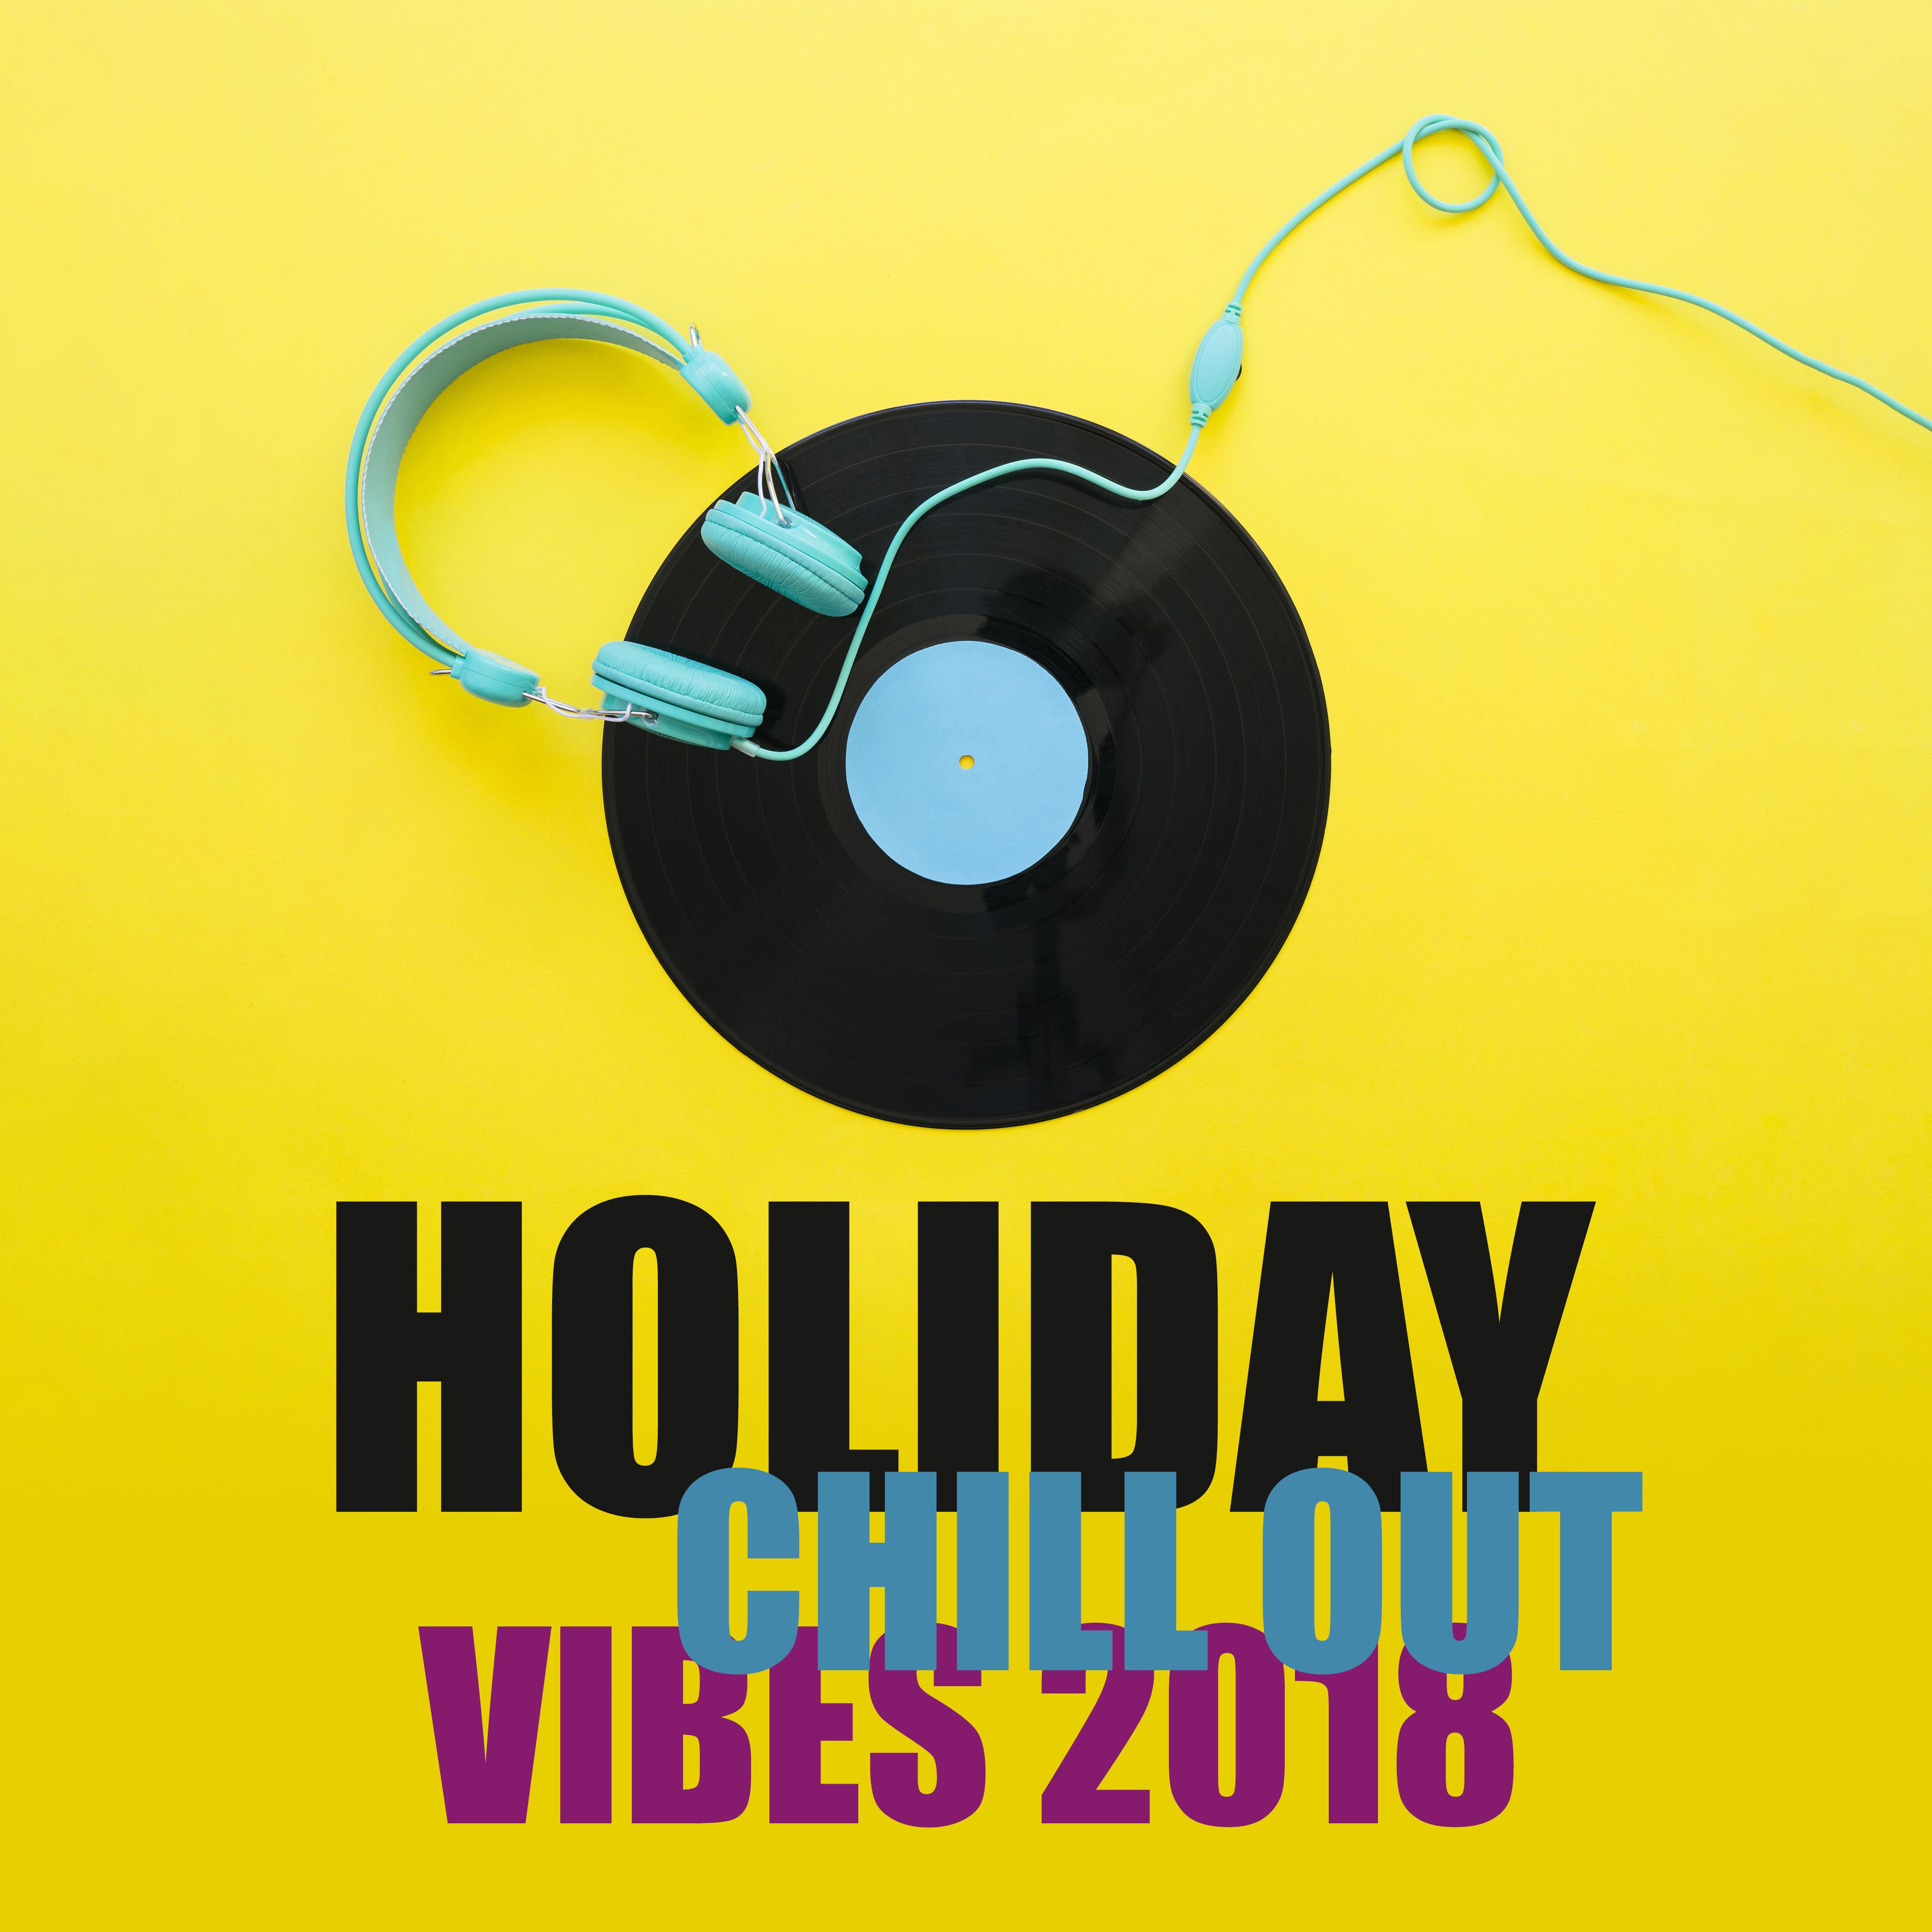 Holiday Chill Out Vibes 2018